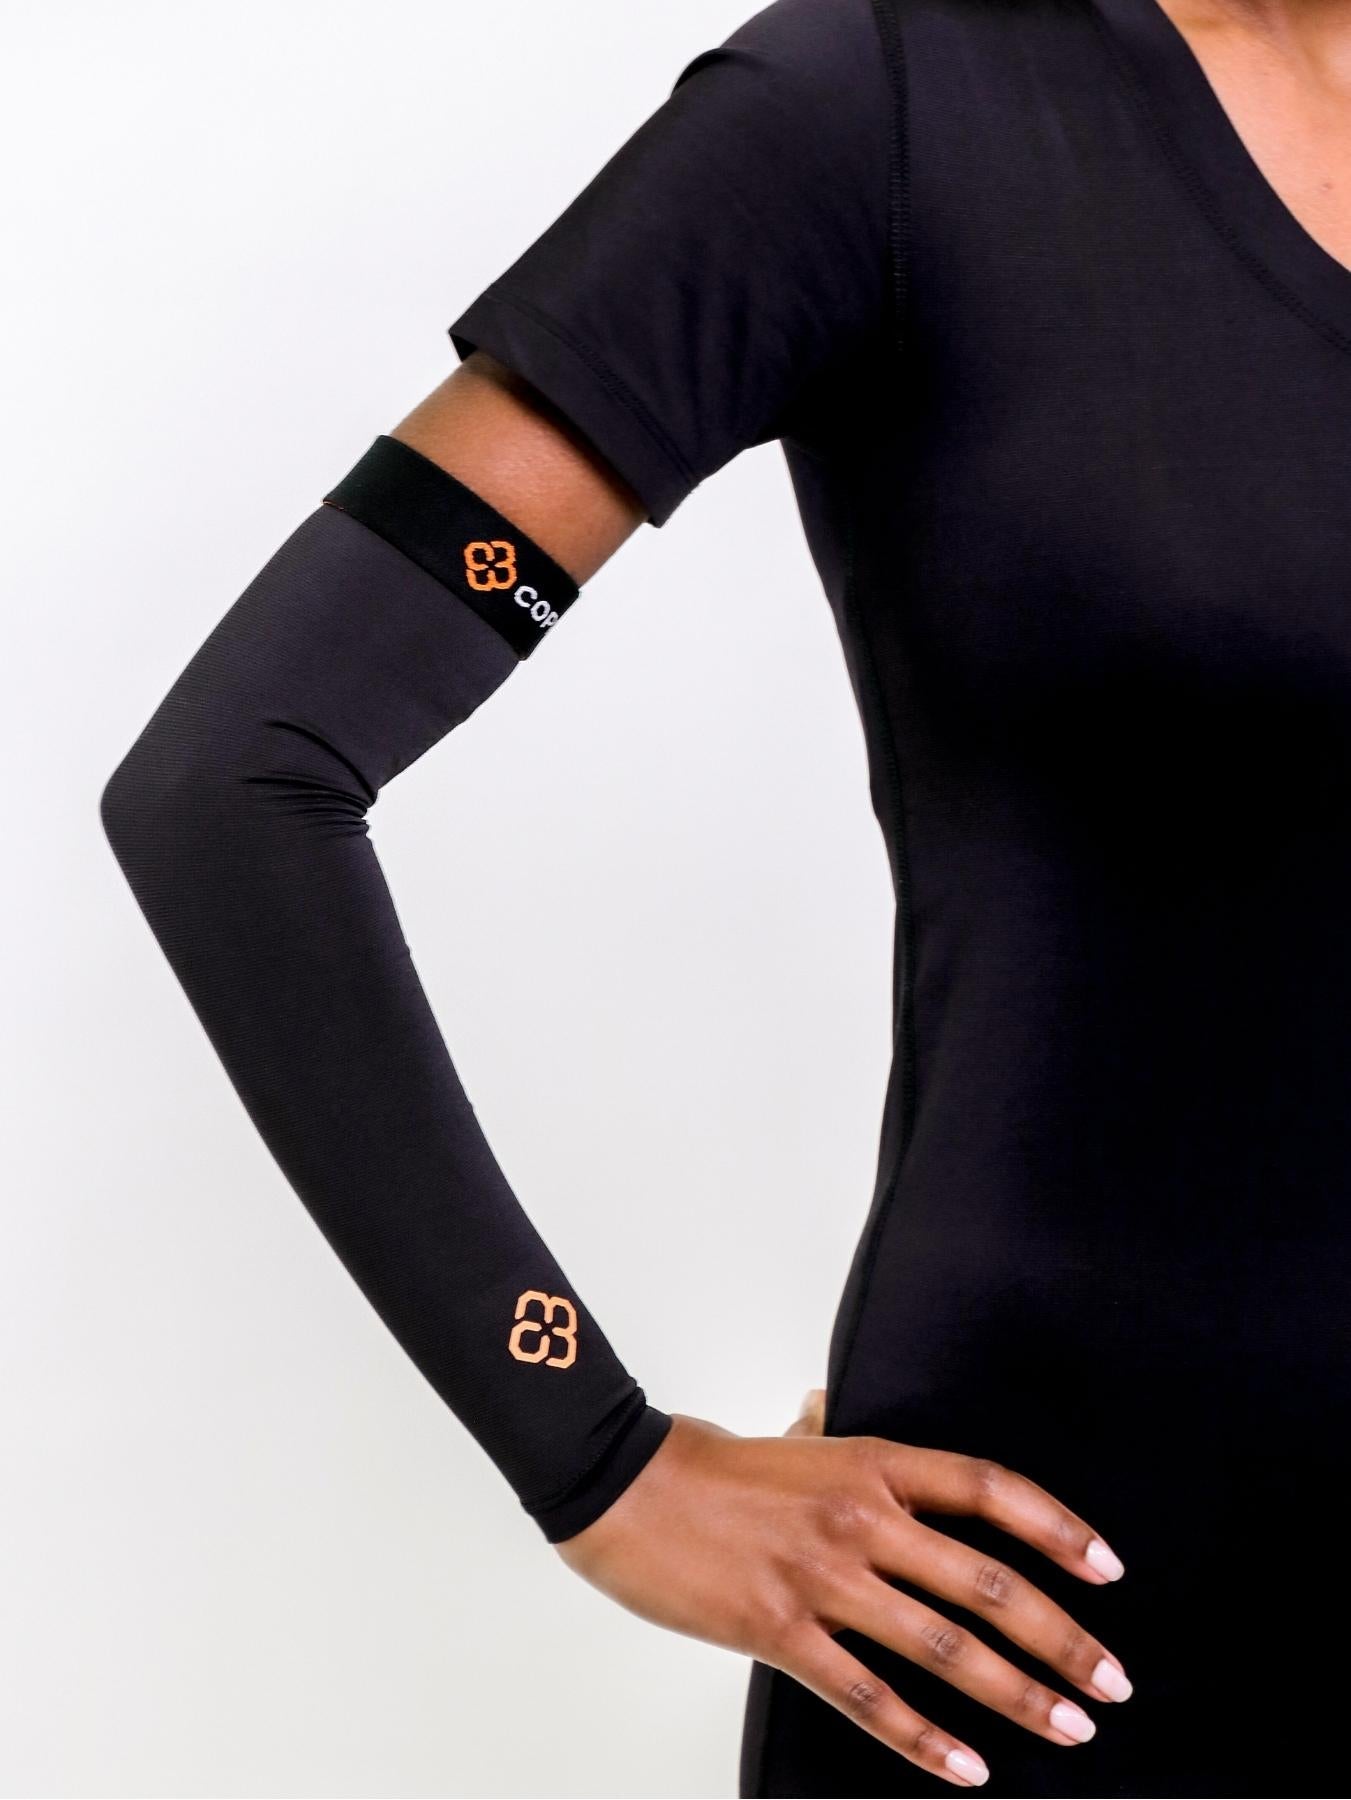 Copper Compression Arm Sleeve - Unisex